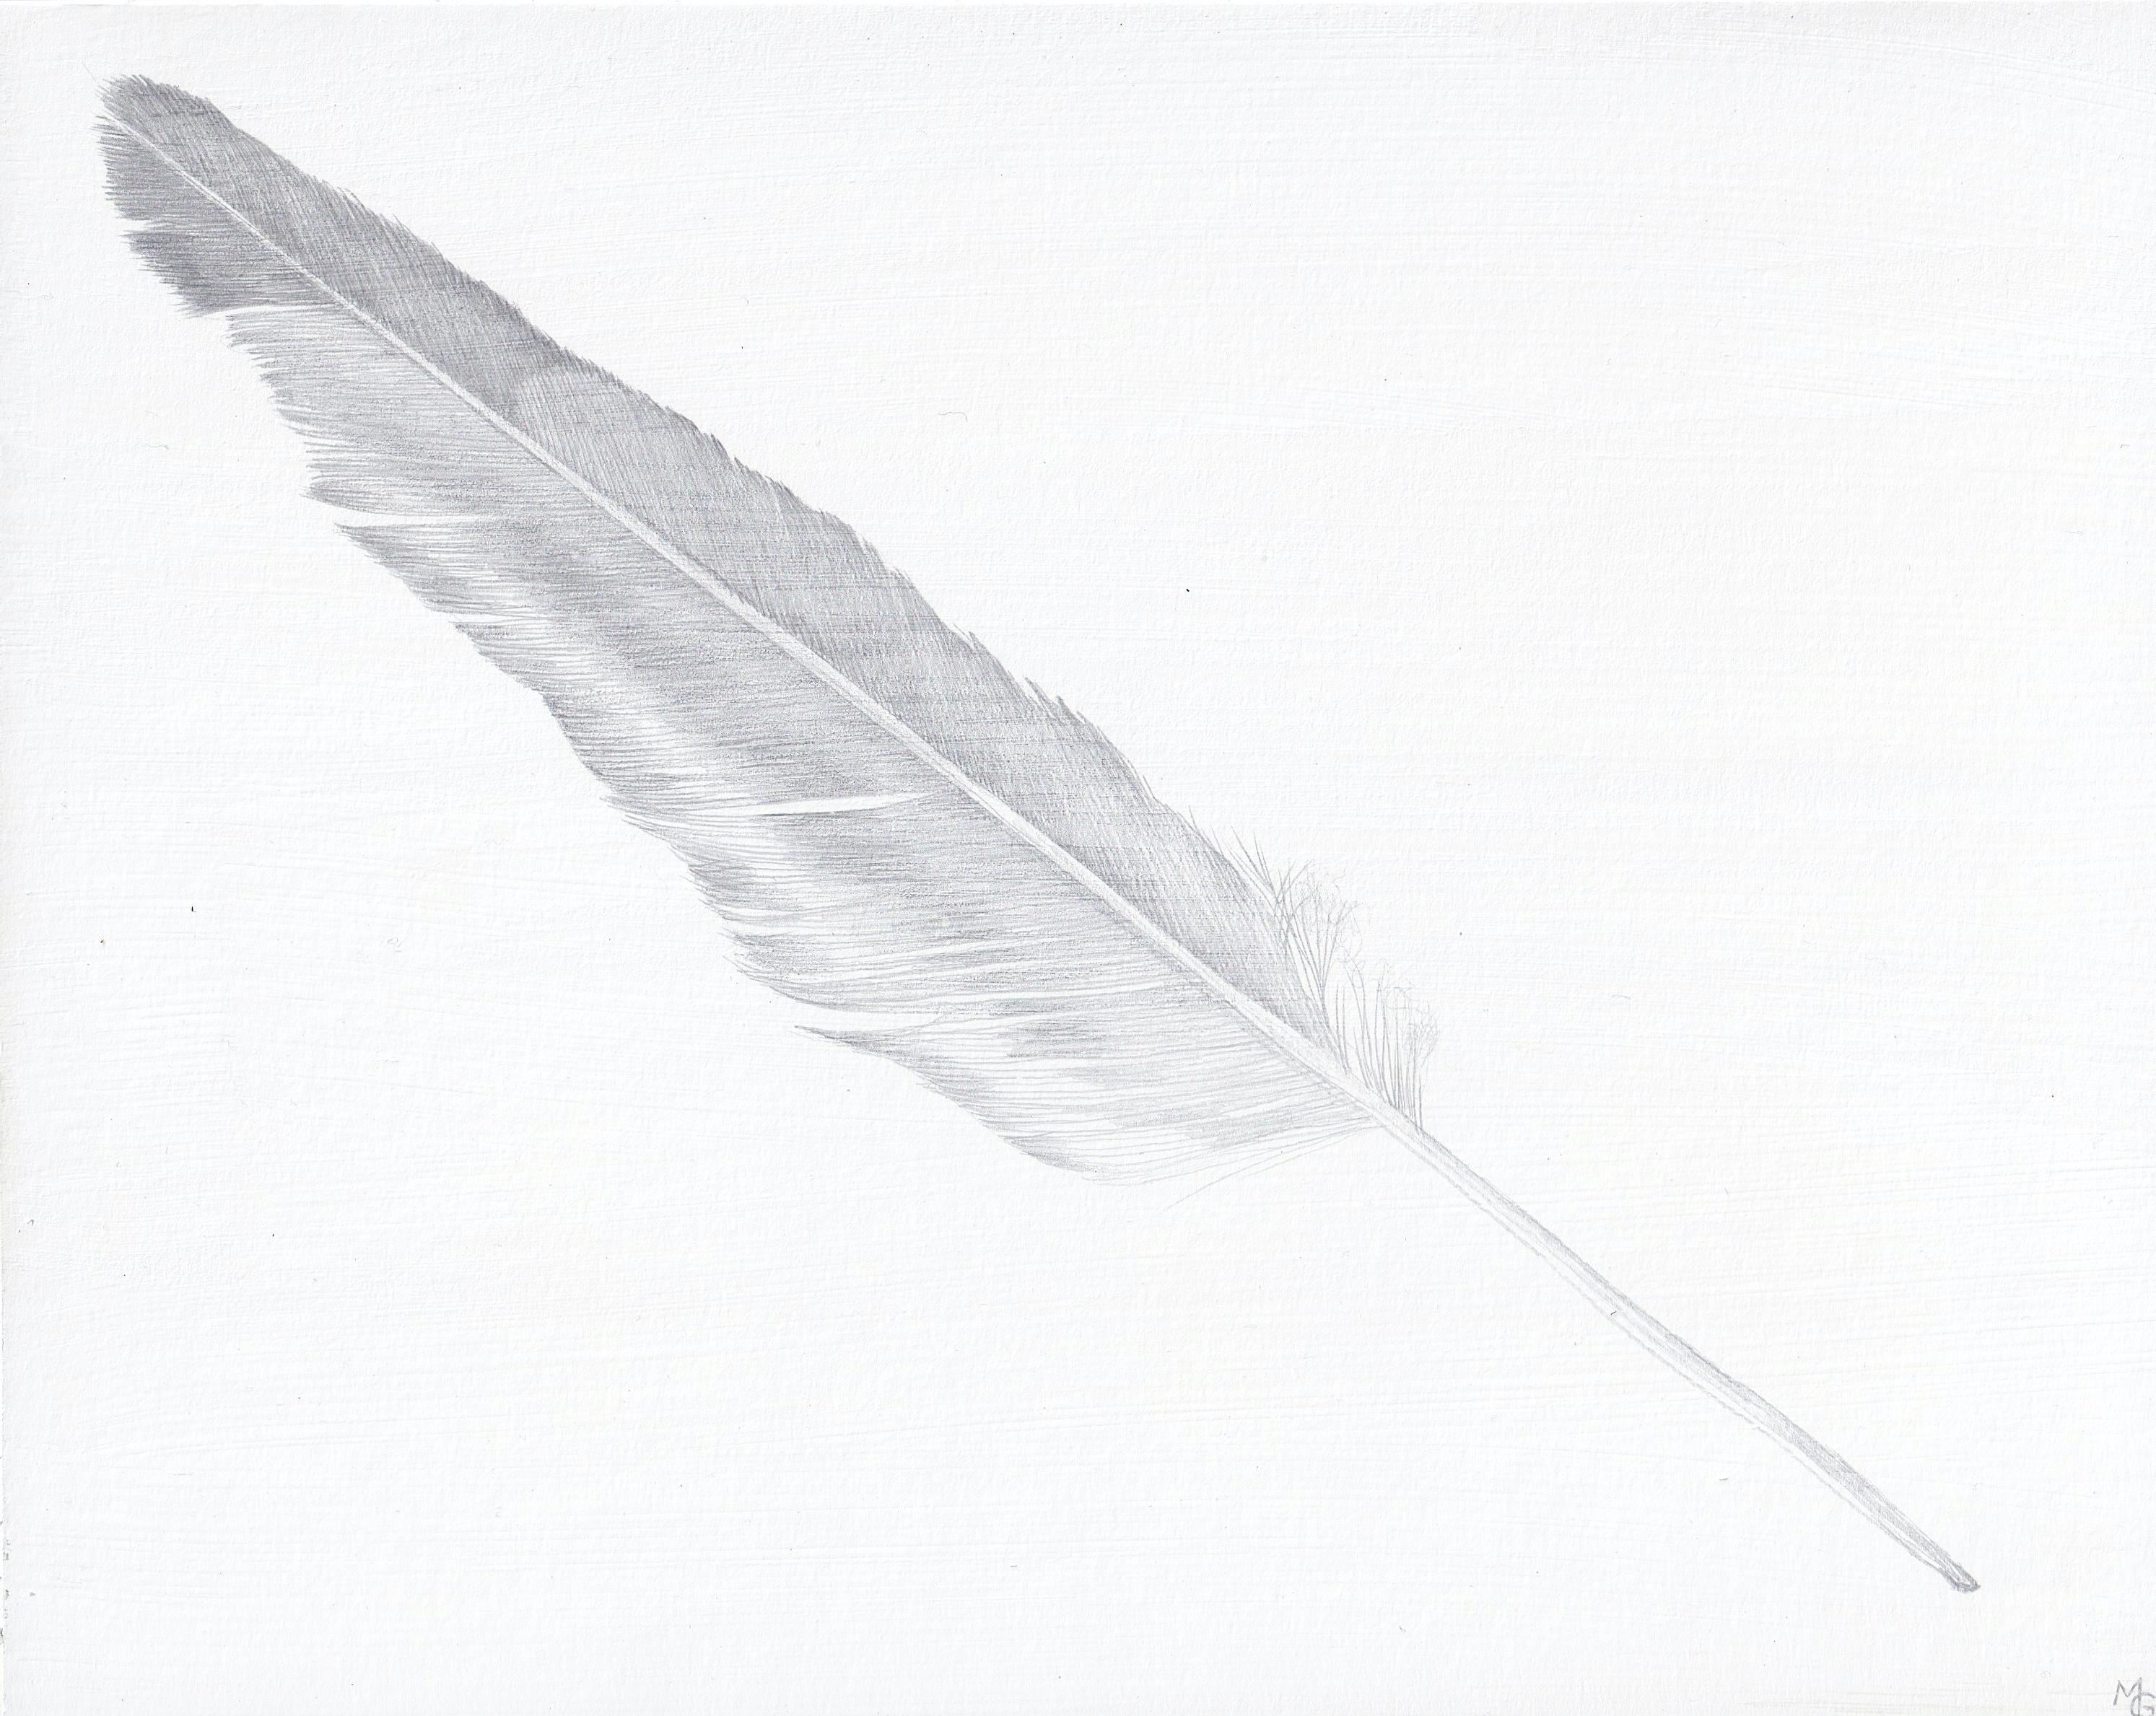 Margot Glass Landscape Art - Seagull Feather, Silverpoint Drawing of Bird's Feather in Soft Gray on White